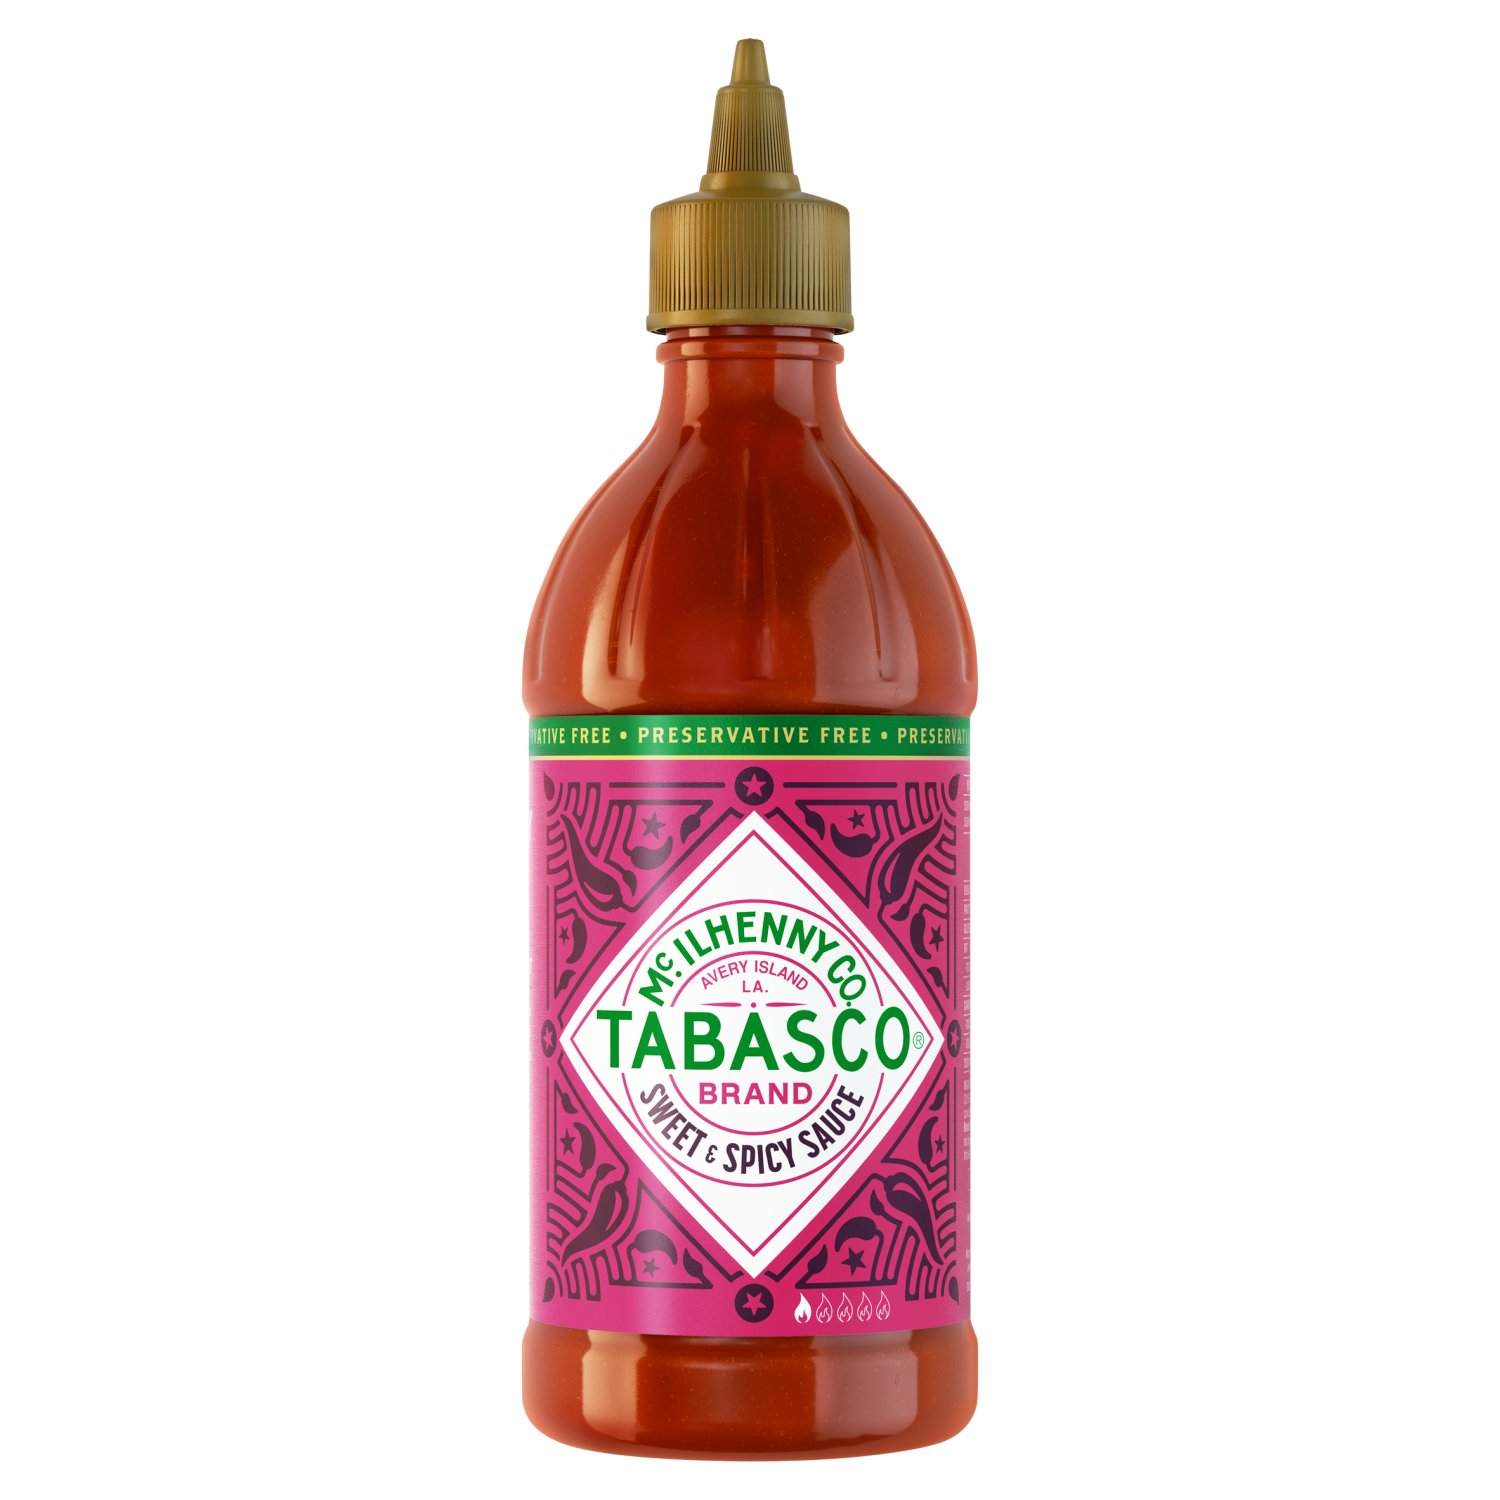 Tabasco sweet and spicy 256ml